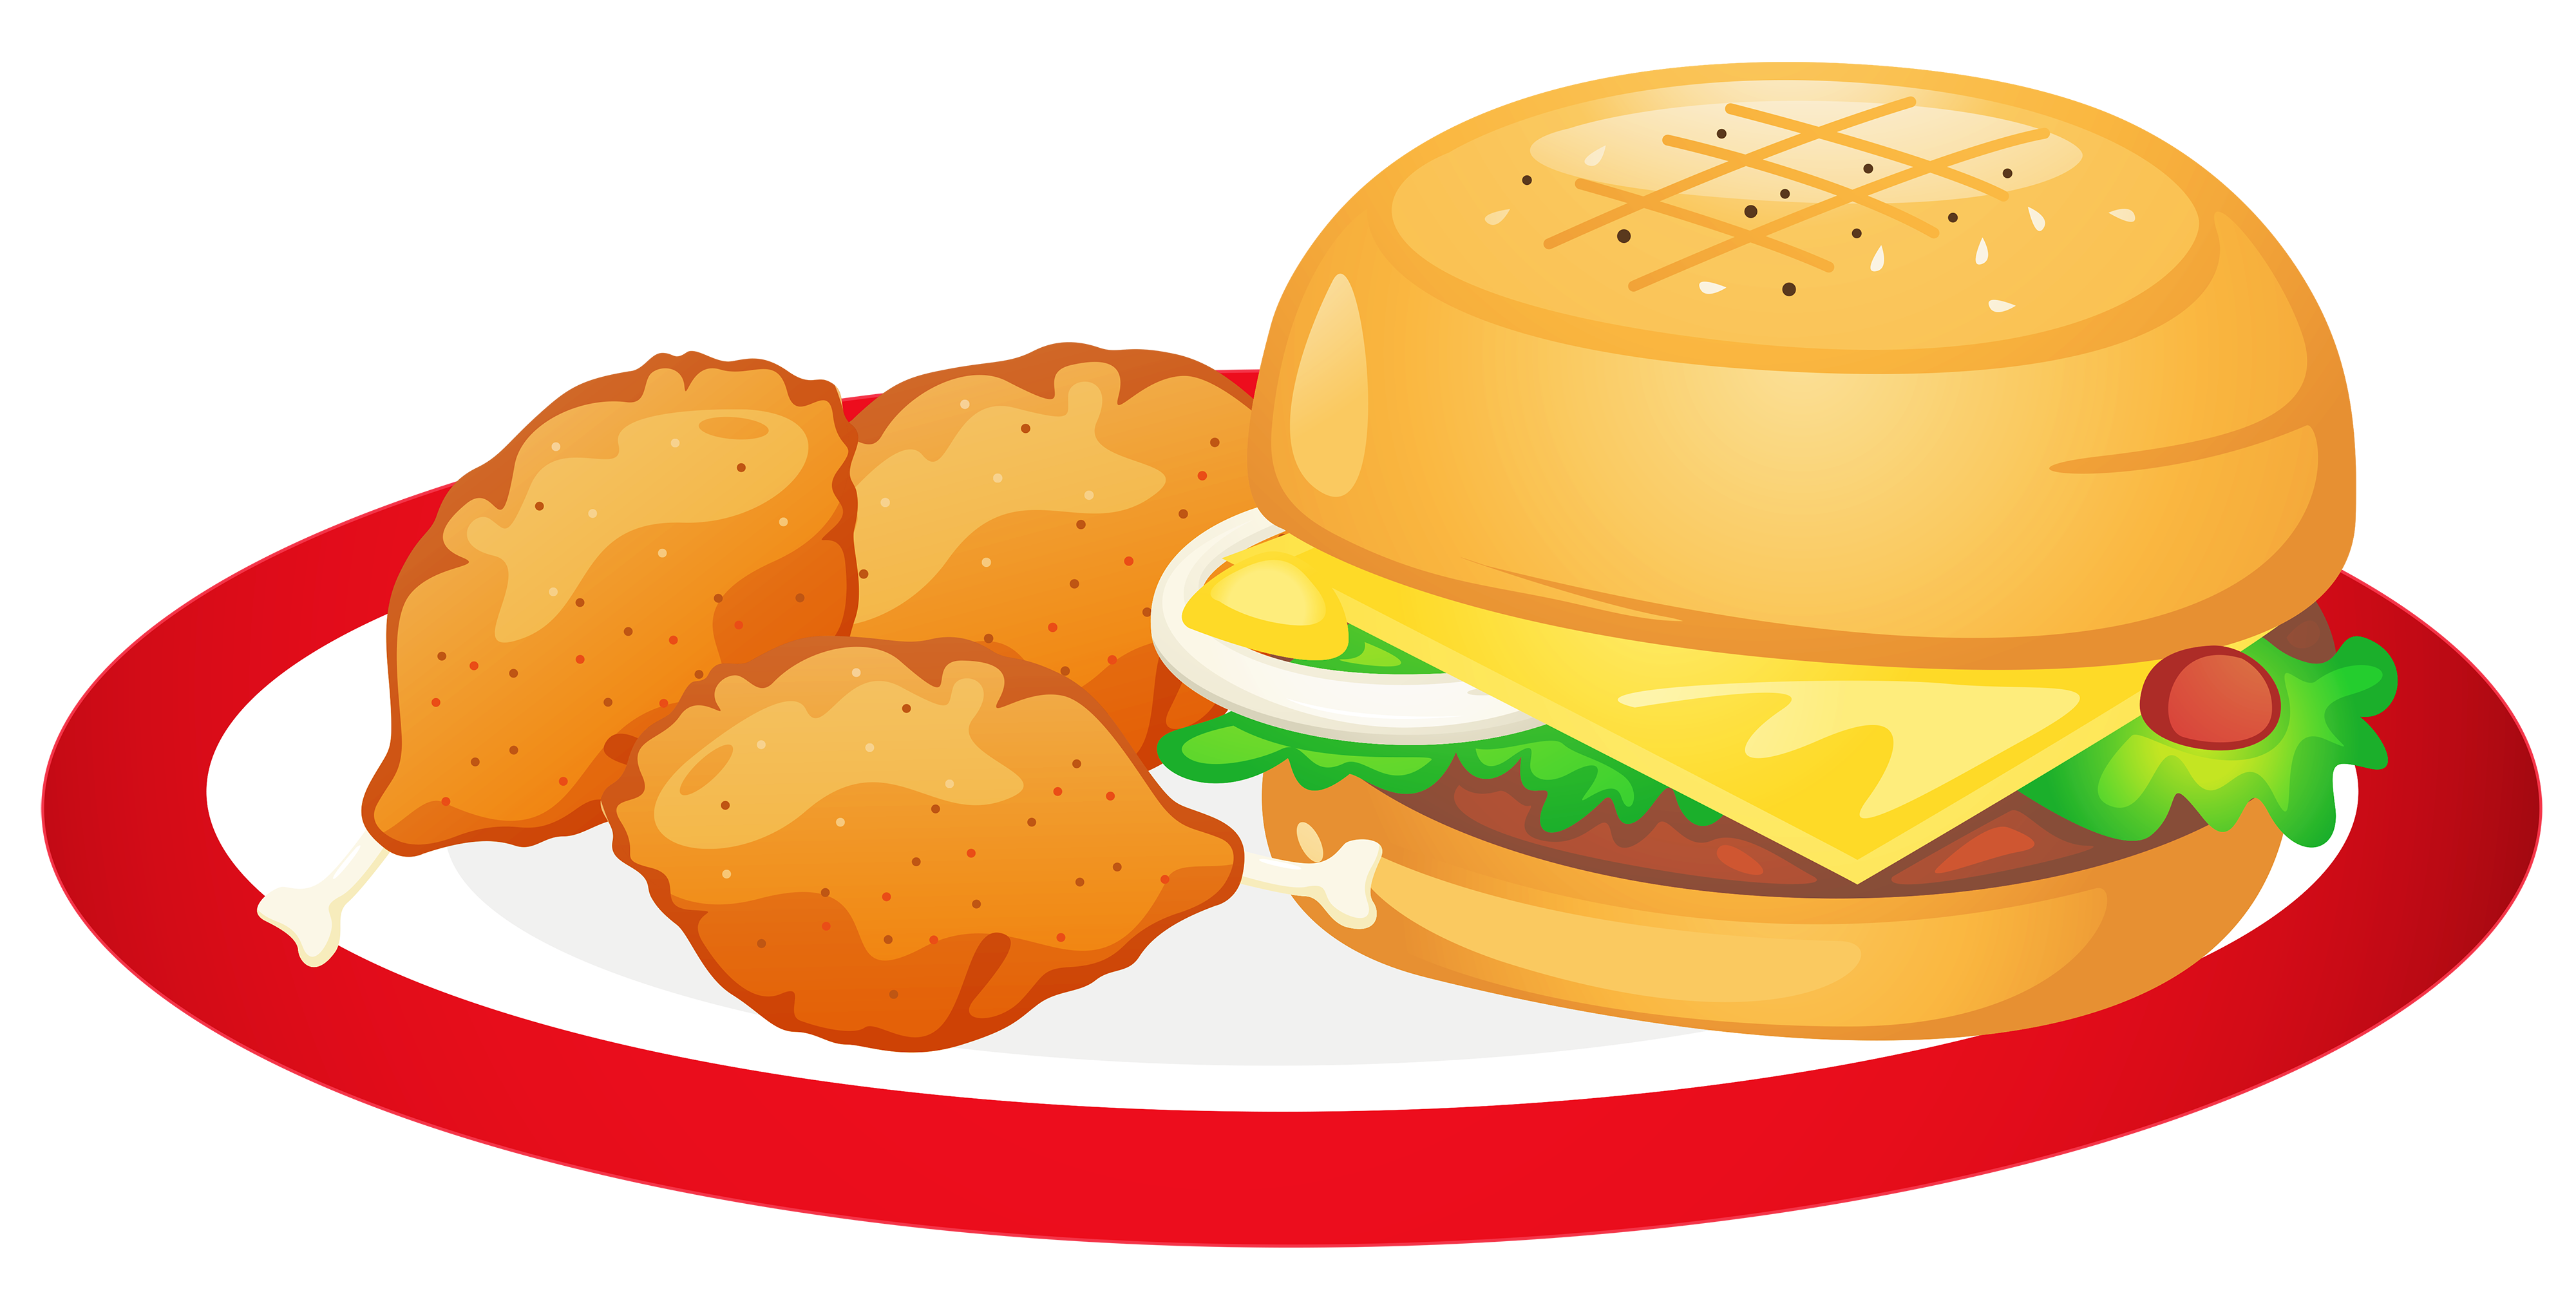 Free Food Clipart Transparent Background, Download Free Clip